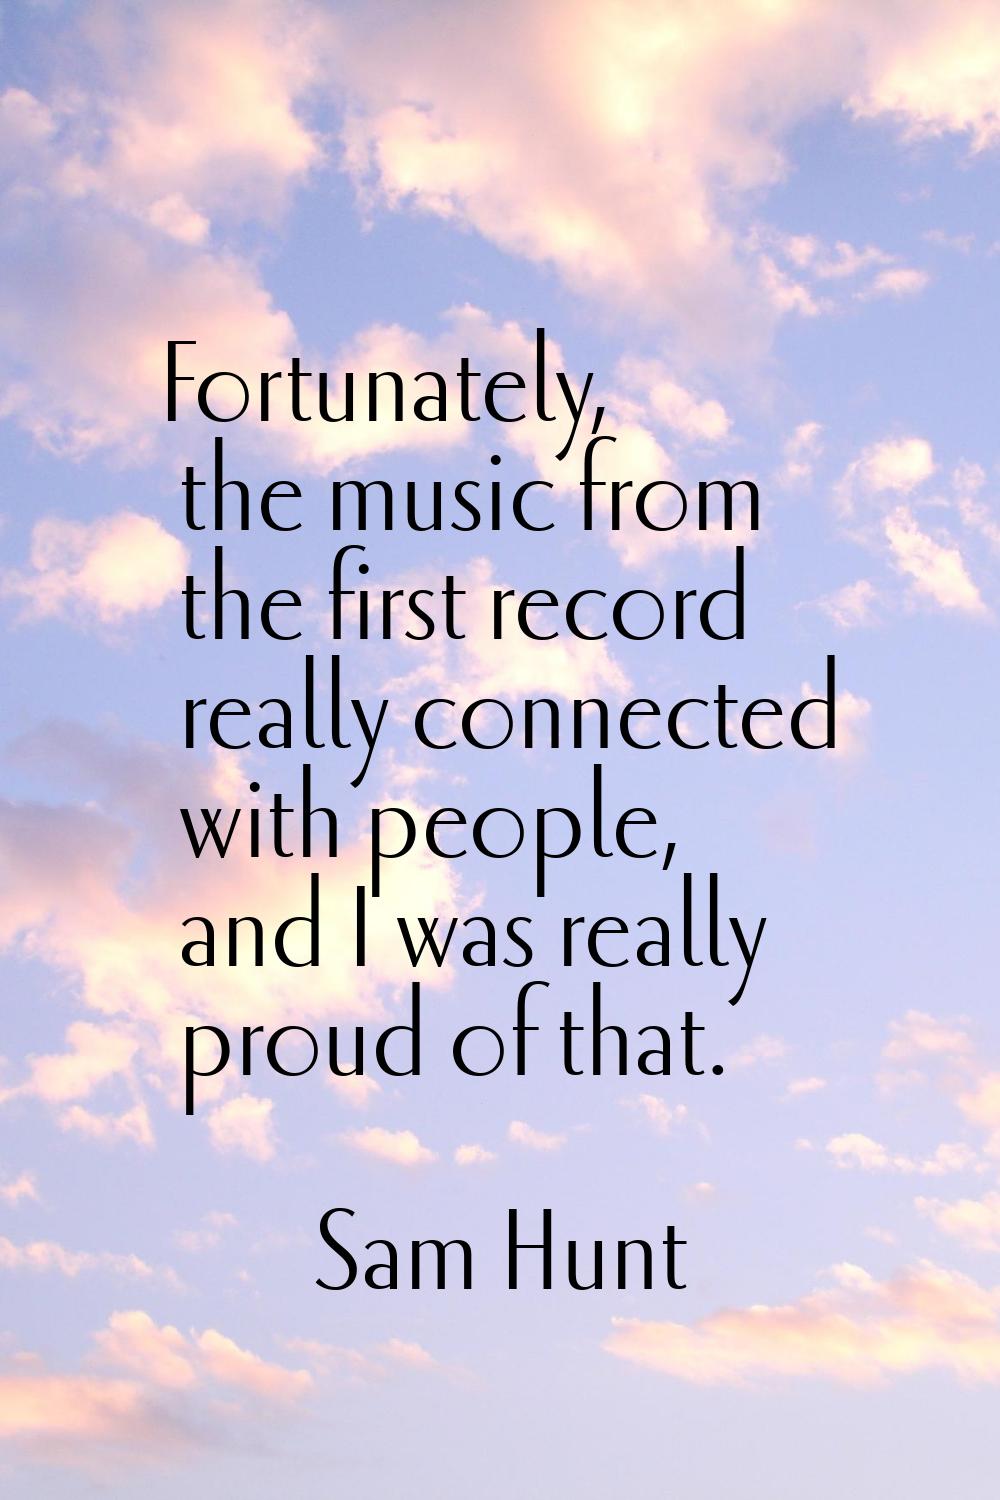 Fortunately, the music from the first record really connected with people, and I was really proud o